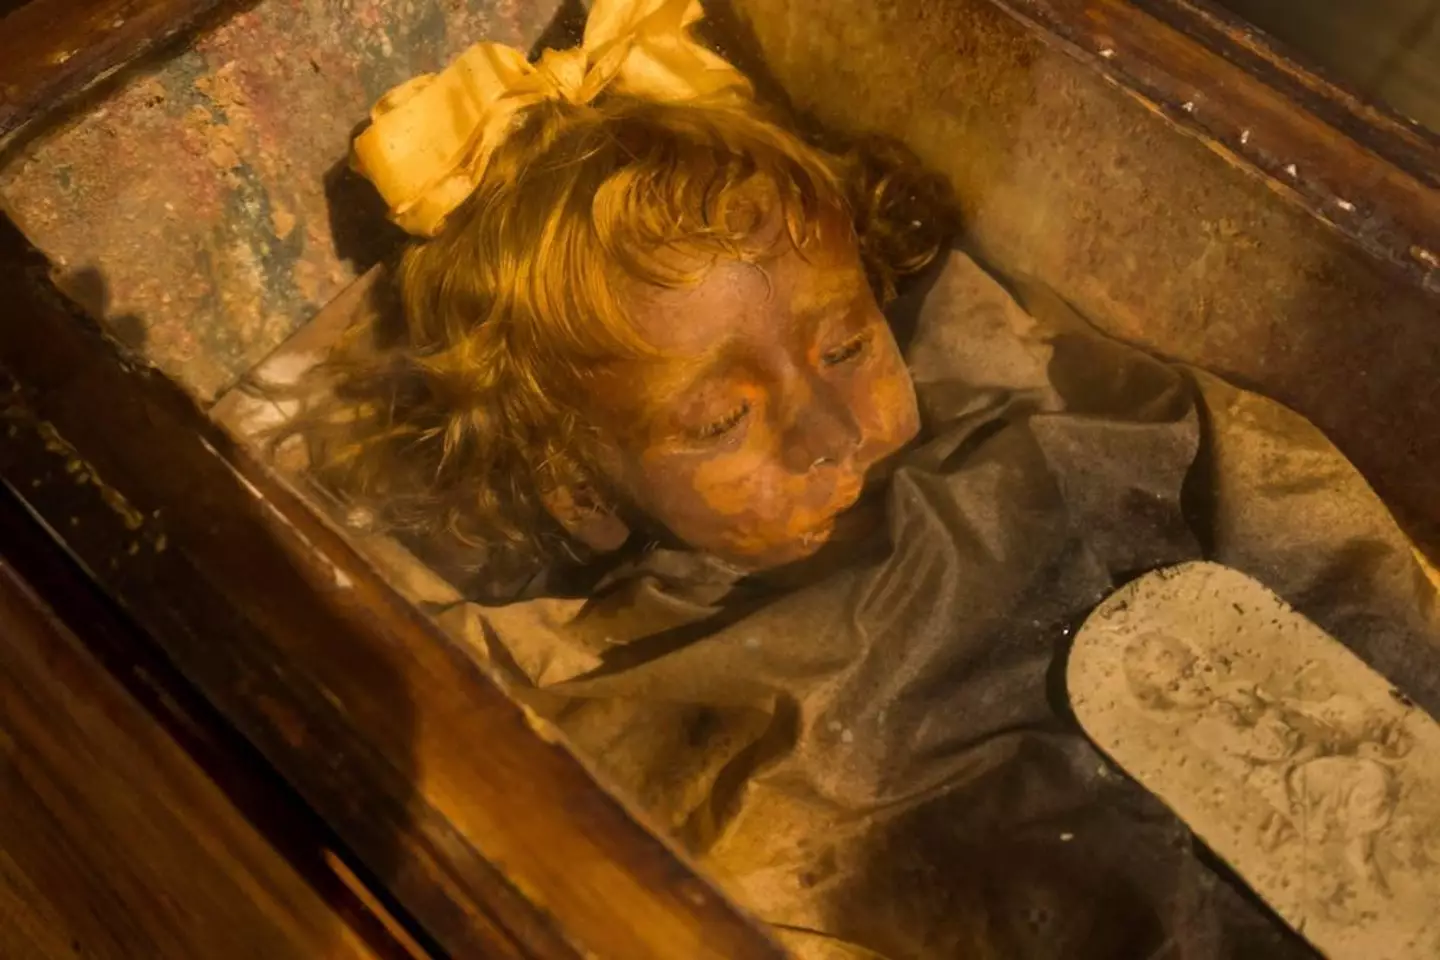 The toddler's body is so well preserved, some have accused it of being a wax replica.